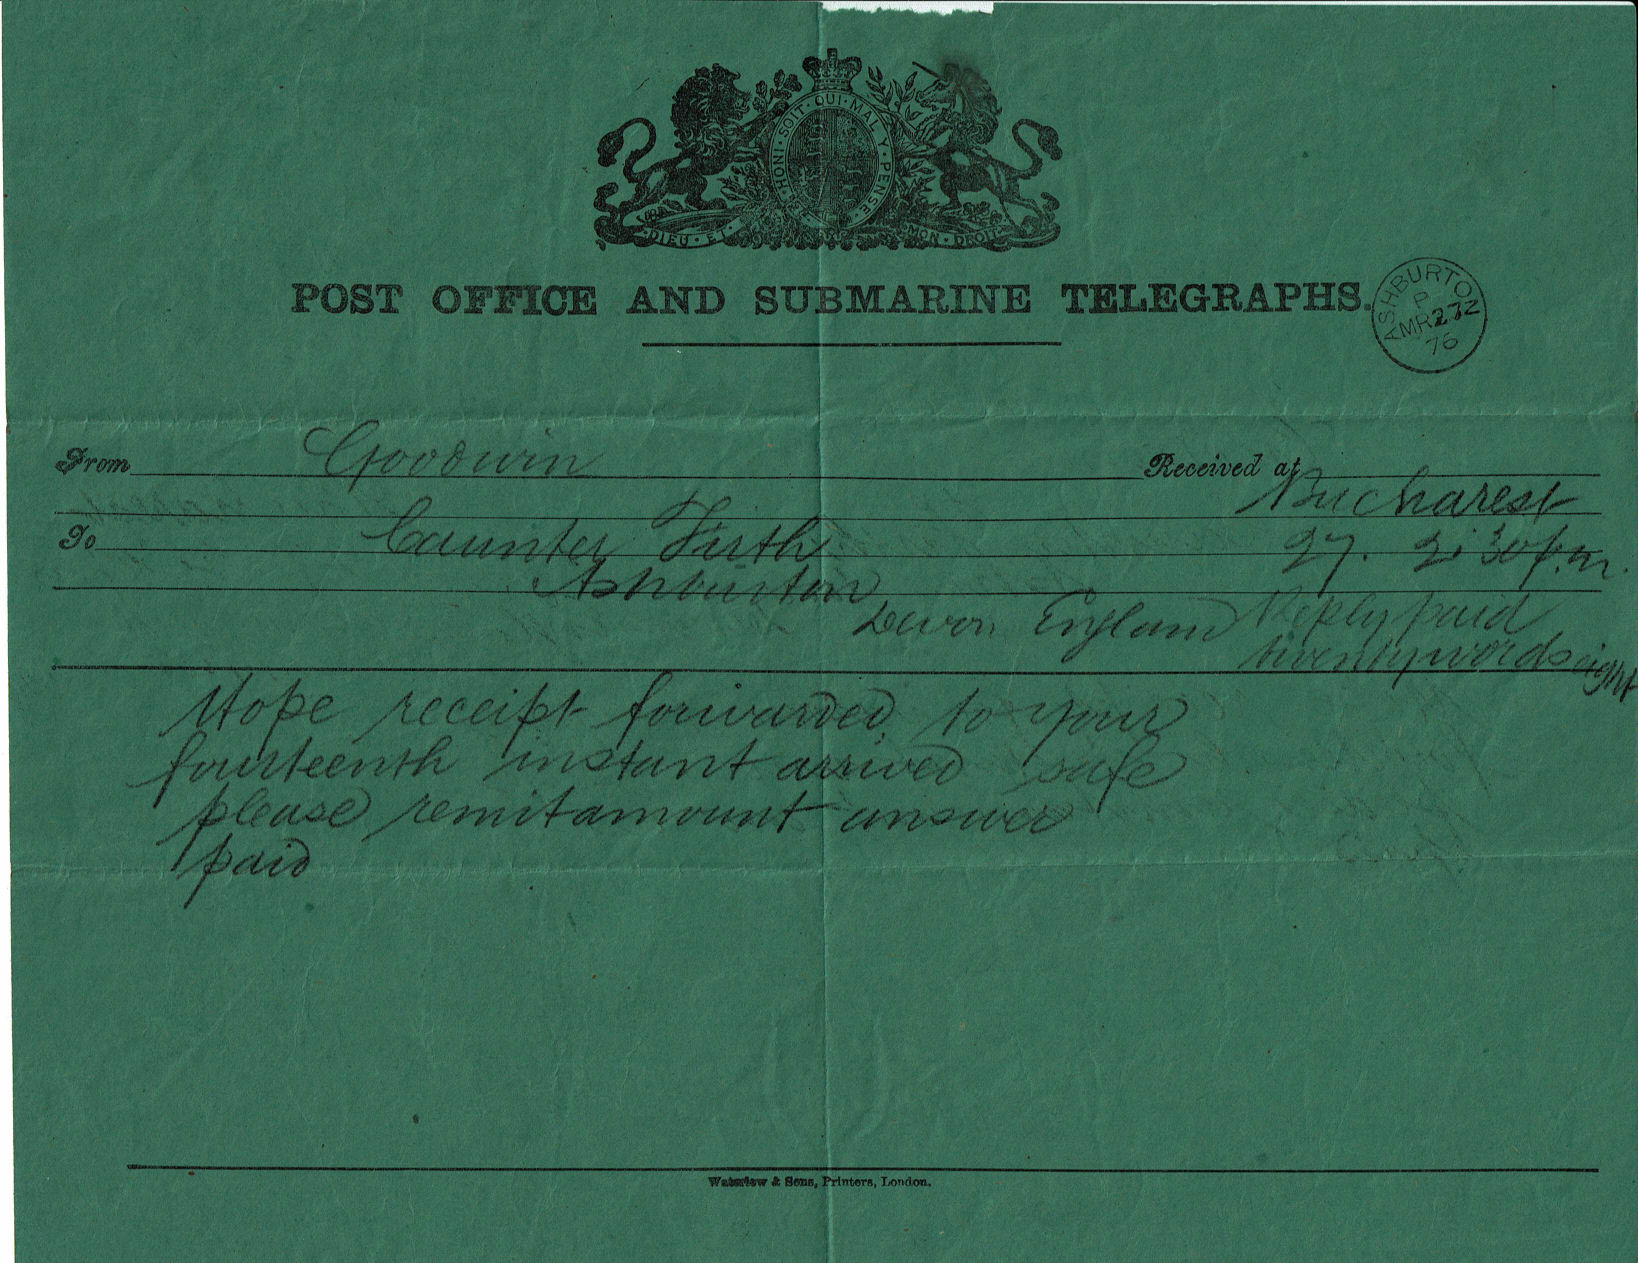 Post Office and Submarine Telegraphs form - 1876